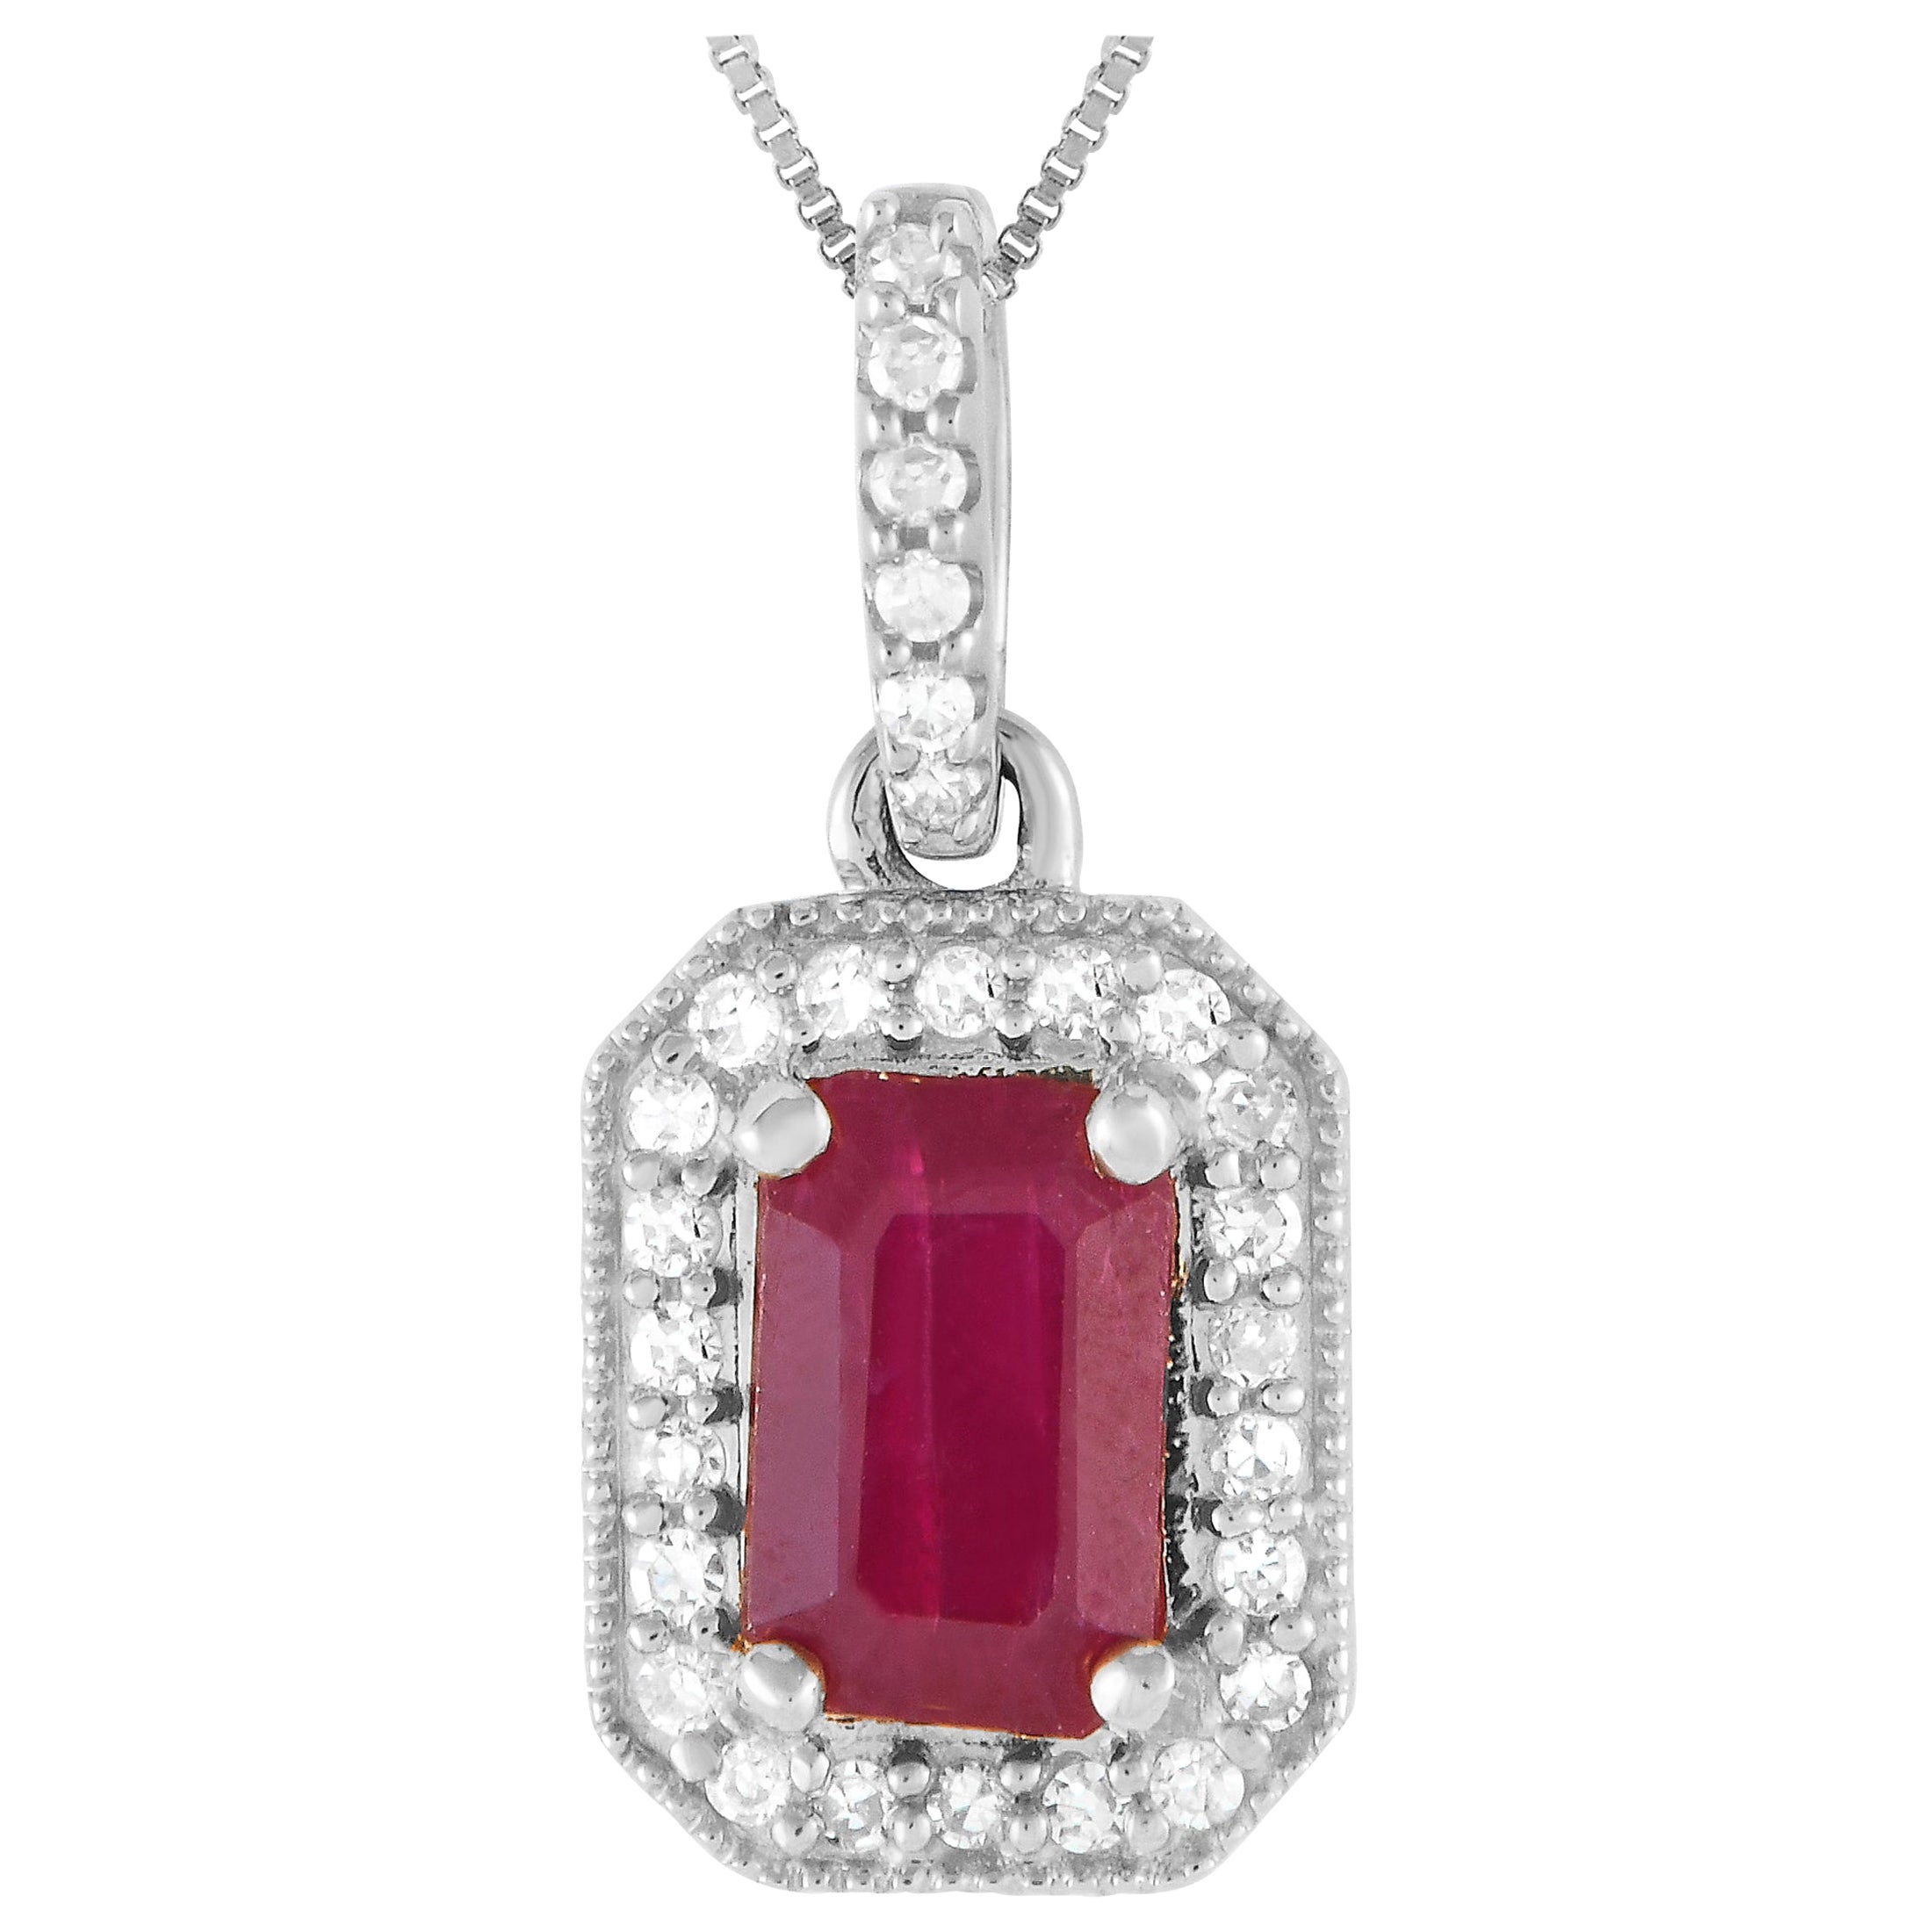 LB Exclusive 14K White Gold 0.10ct Diamond and Ruby Necklace PD4-16050WRU